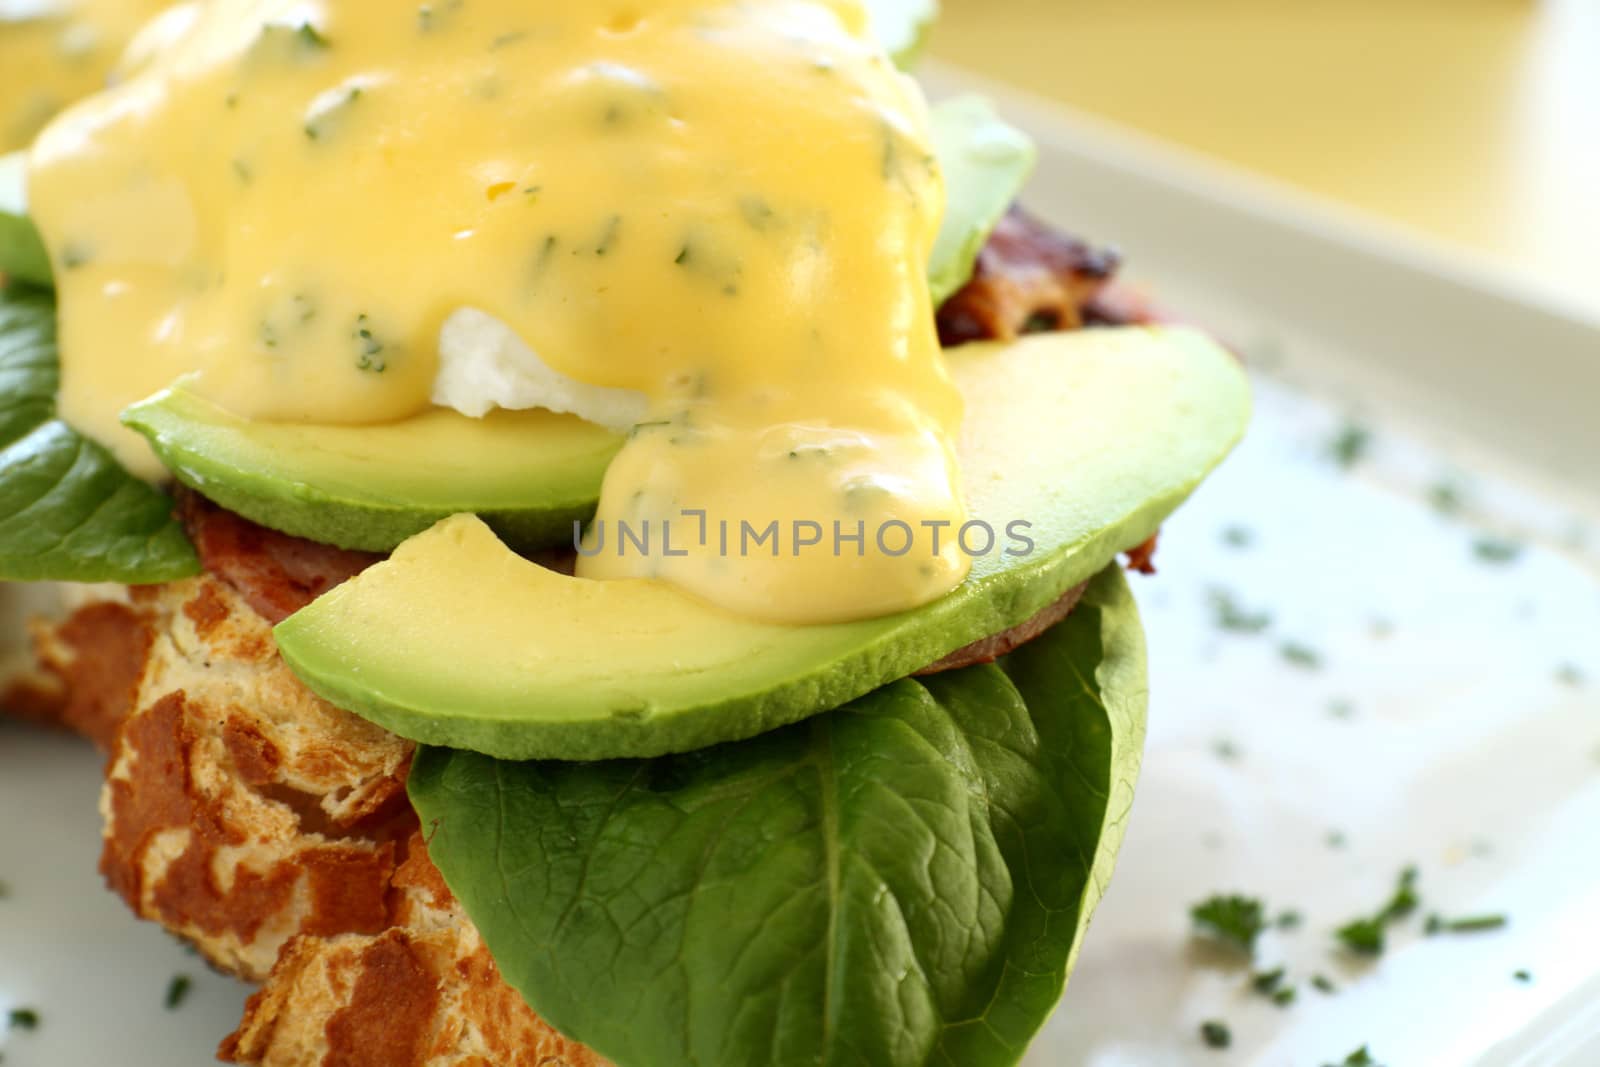 Delicious eggs benedict with hollandaise sauce with avocado.